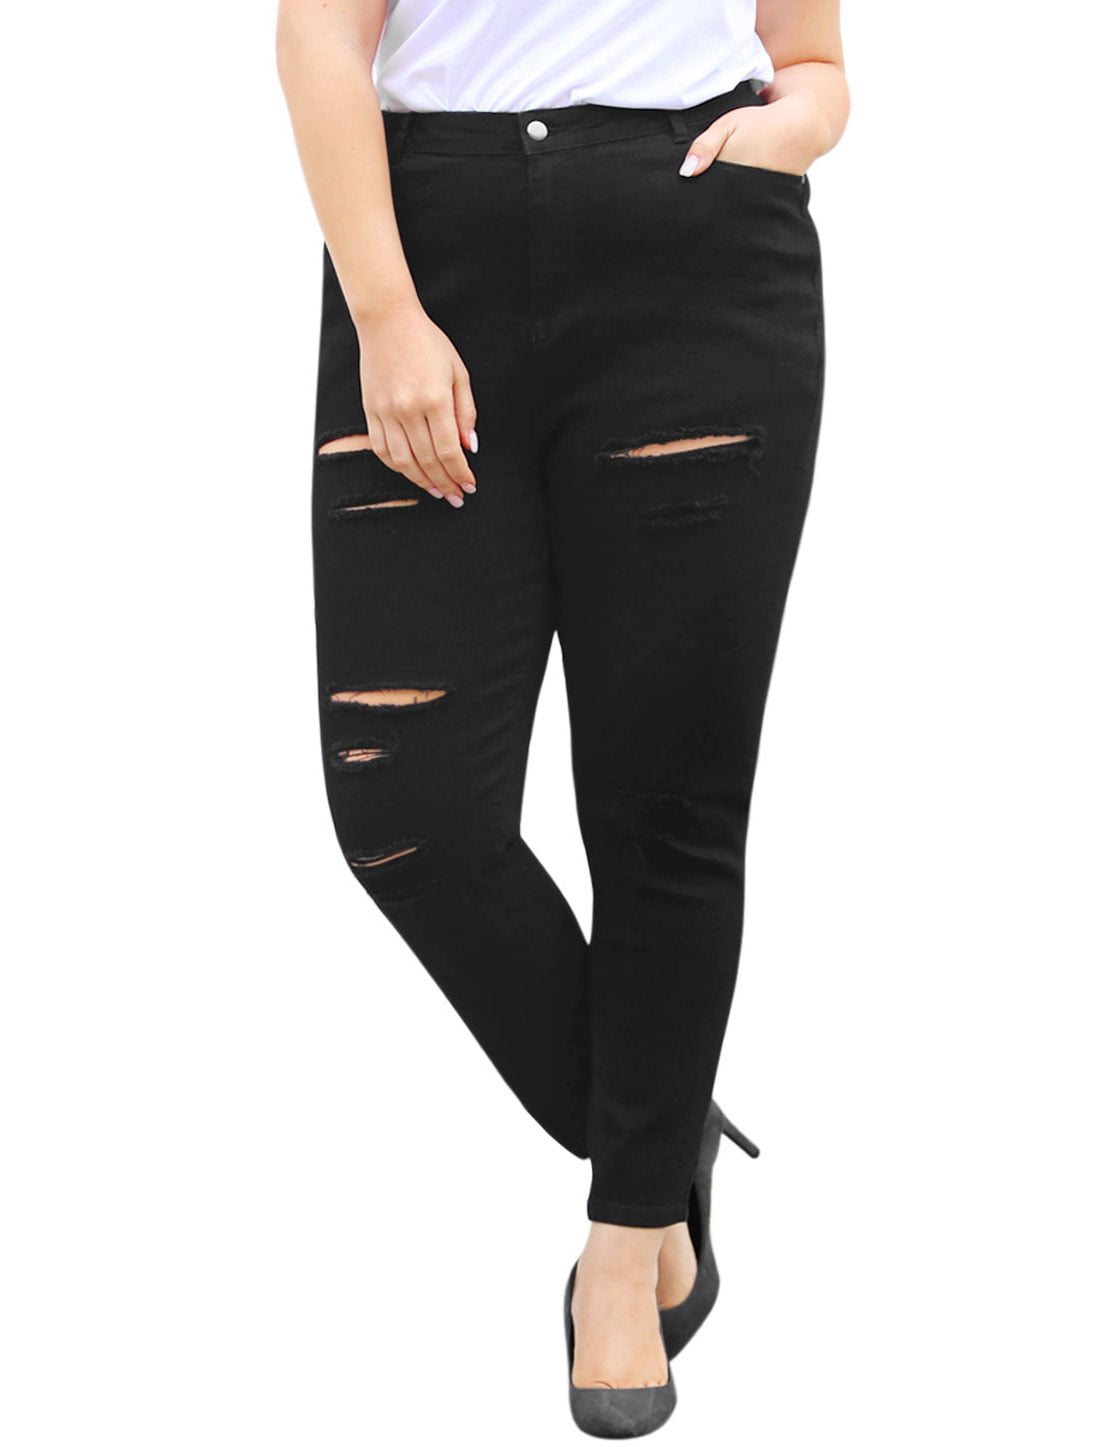 high rise skinny ripped jeans